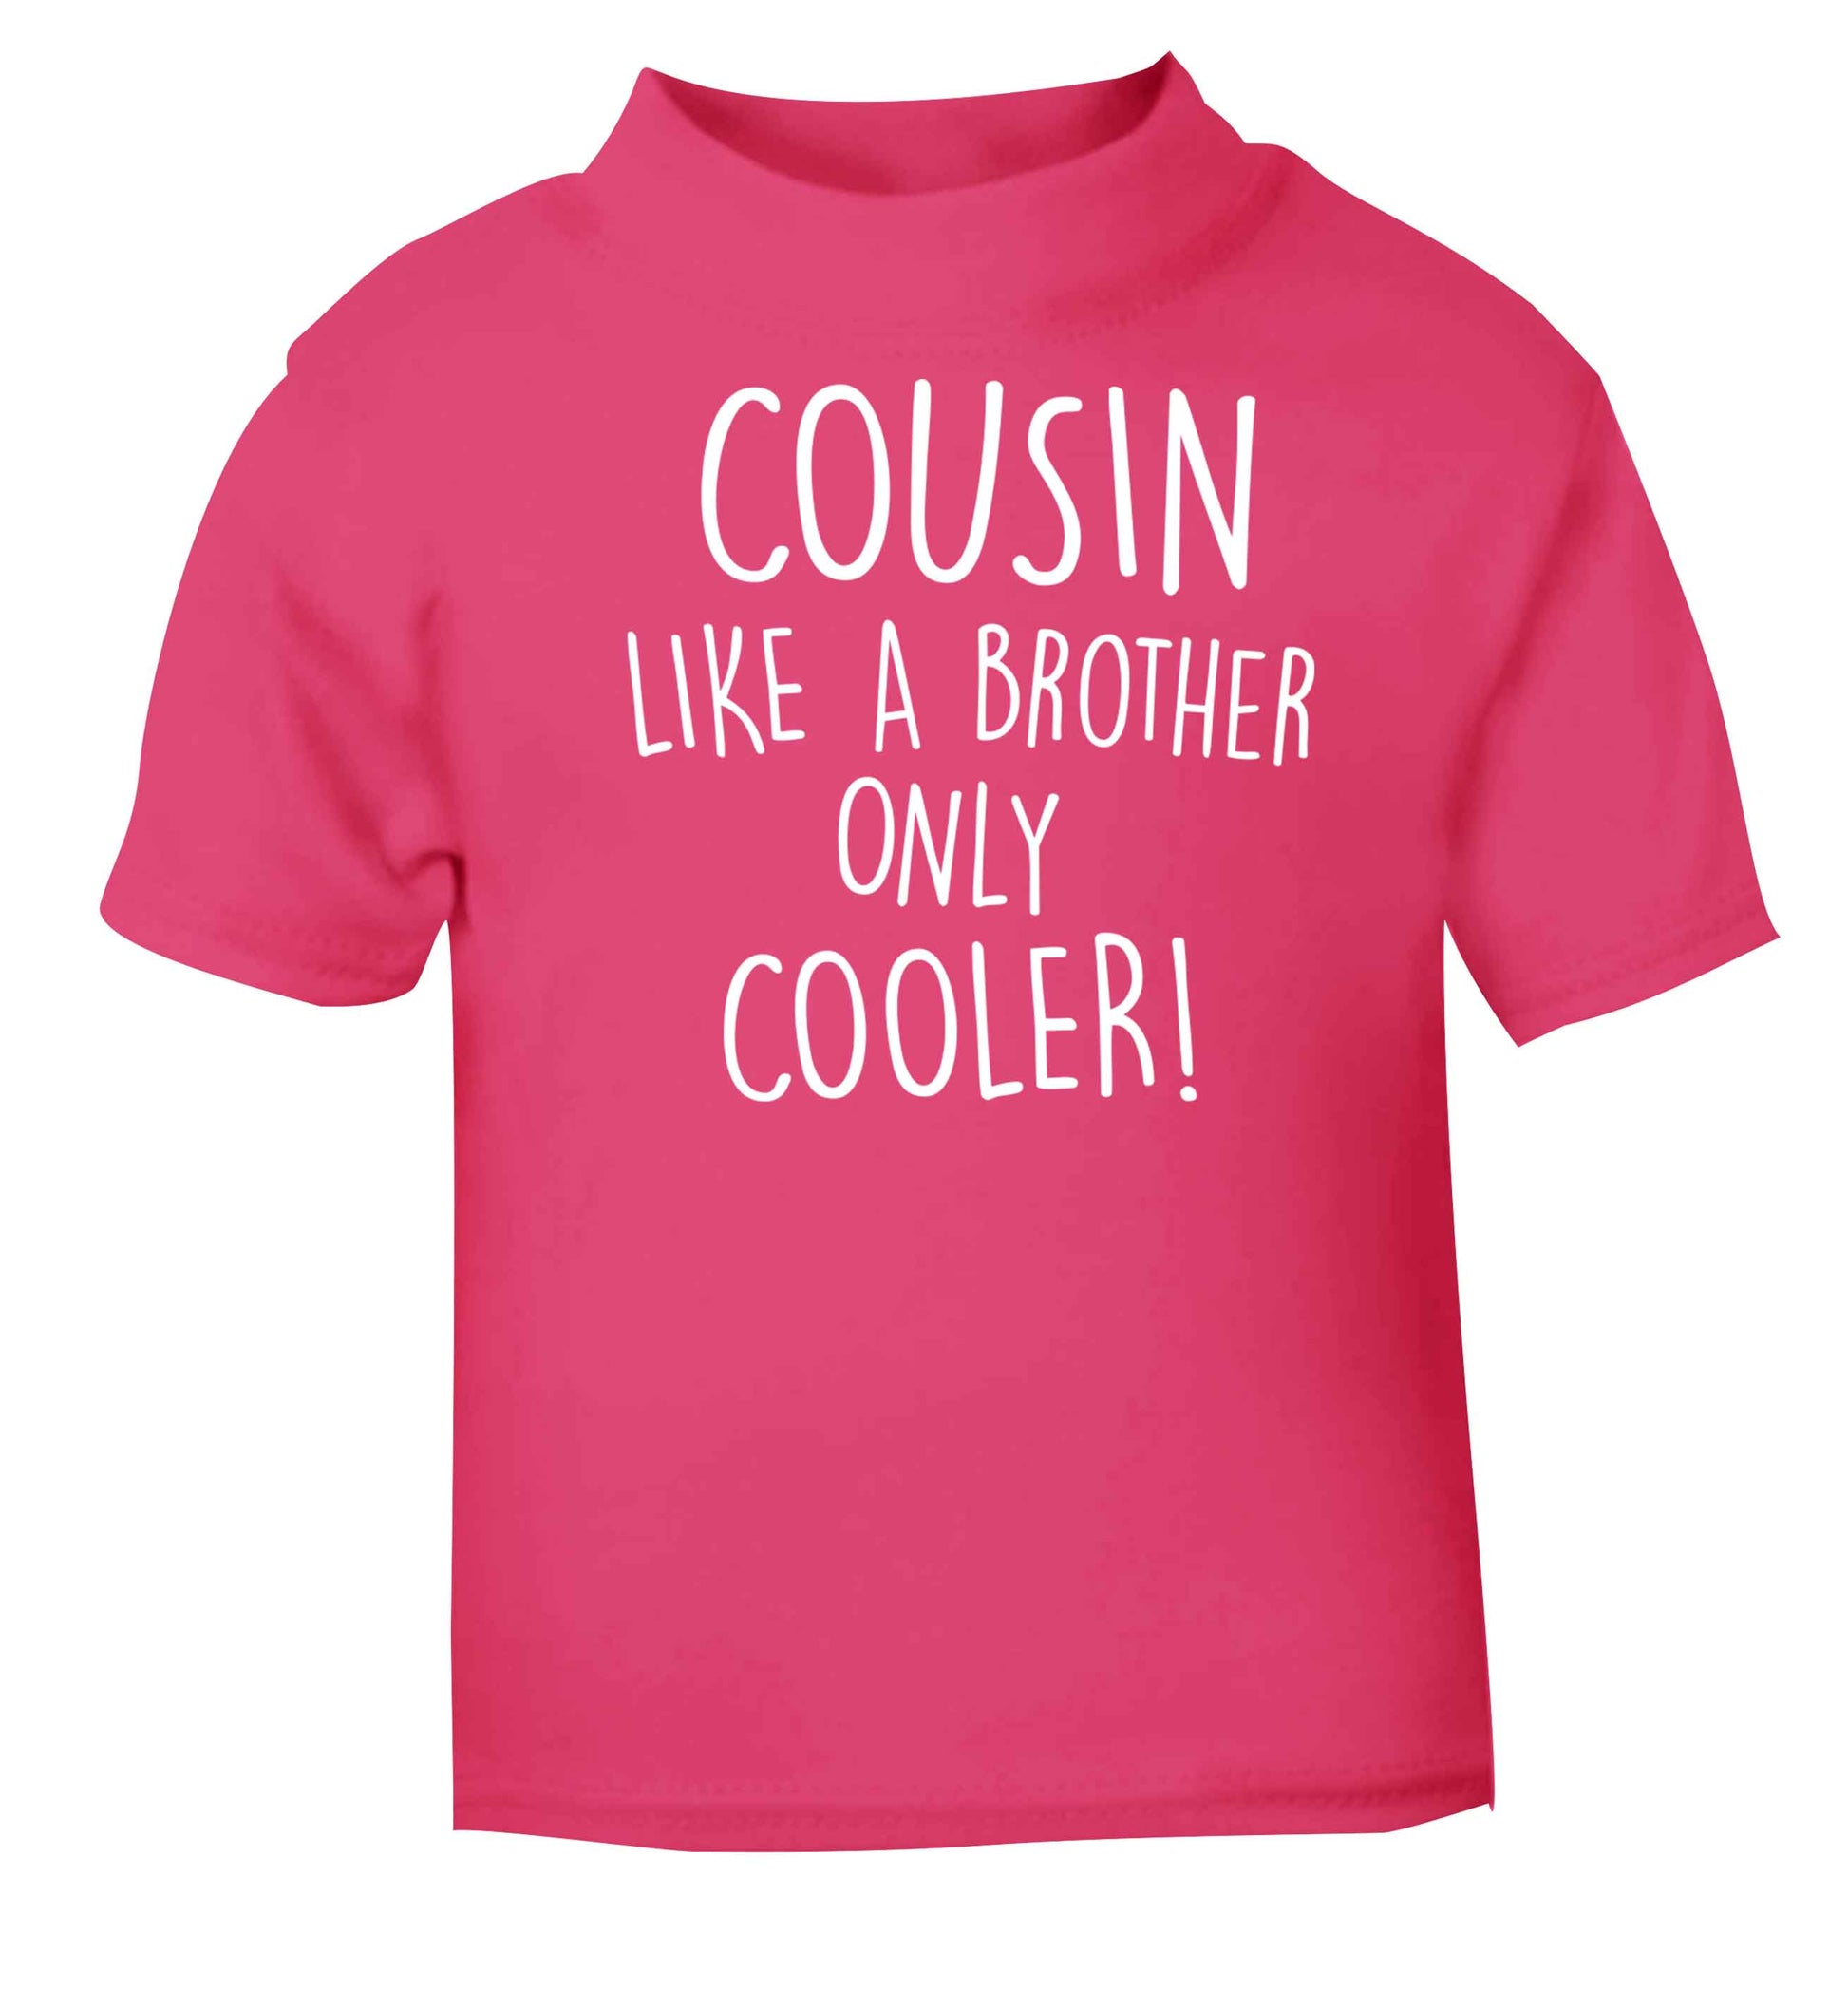 Cousin like a brother only cooler pink baby toddler Tshirt 2 Years